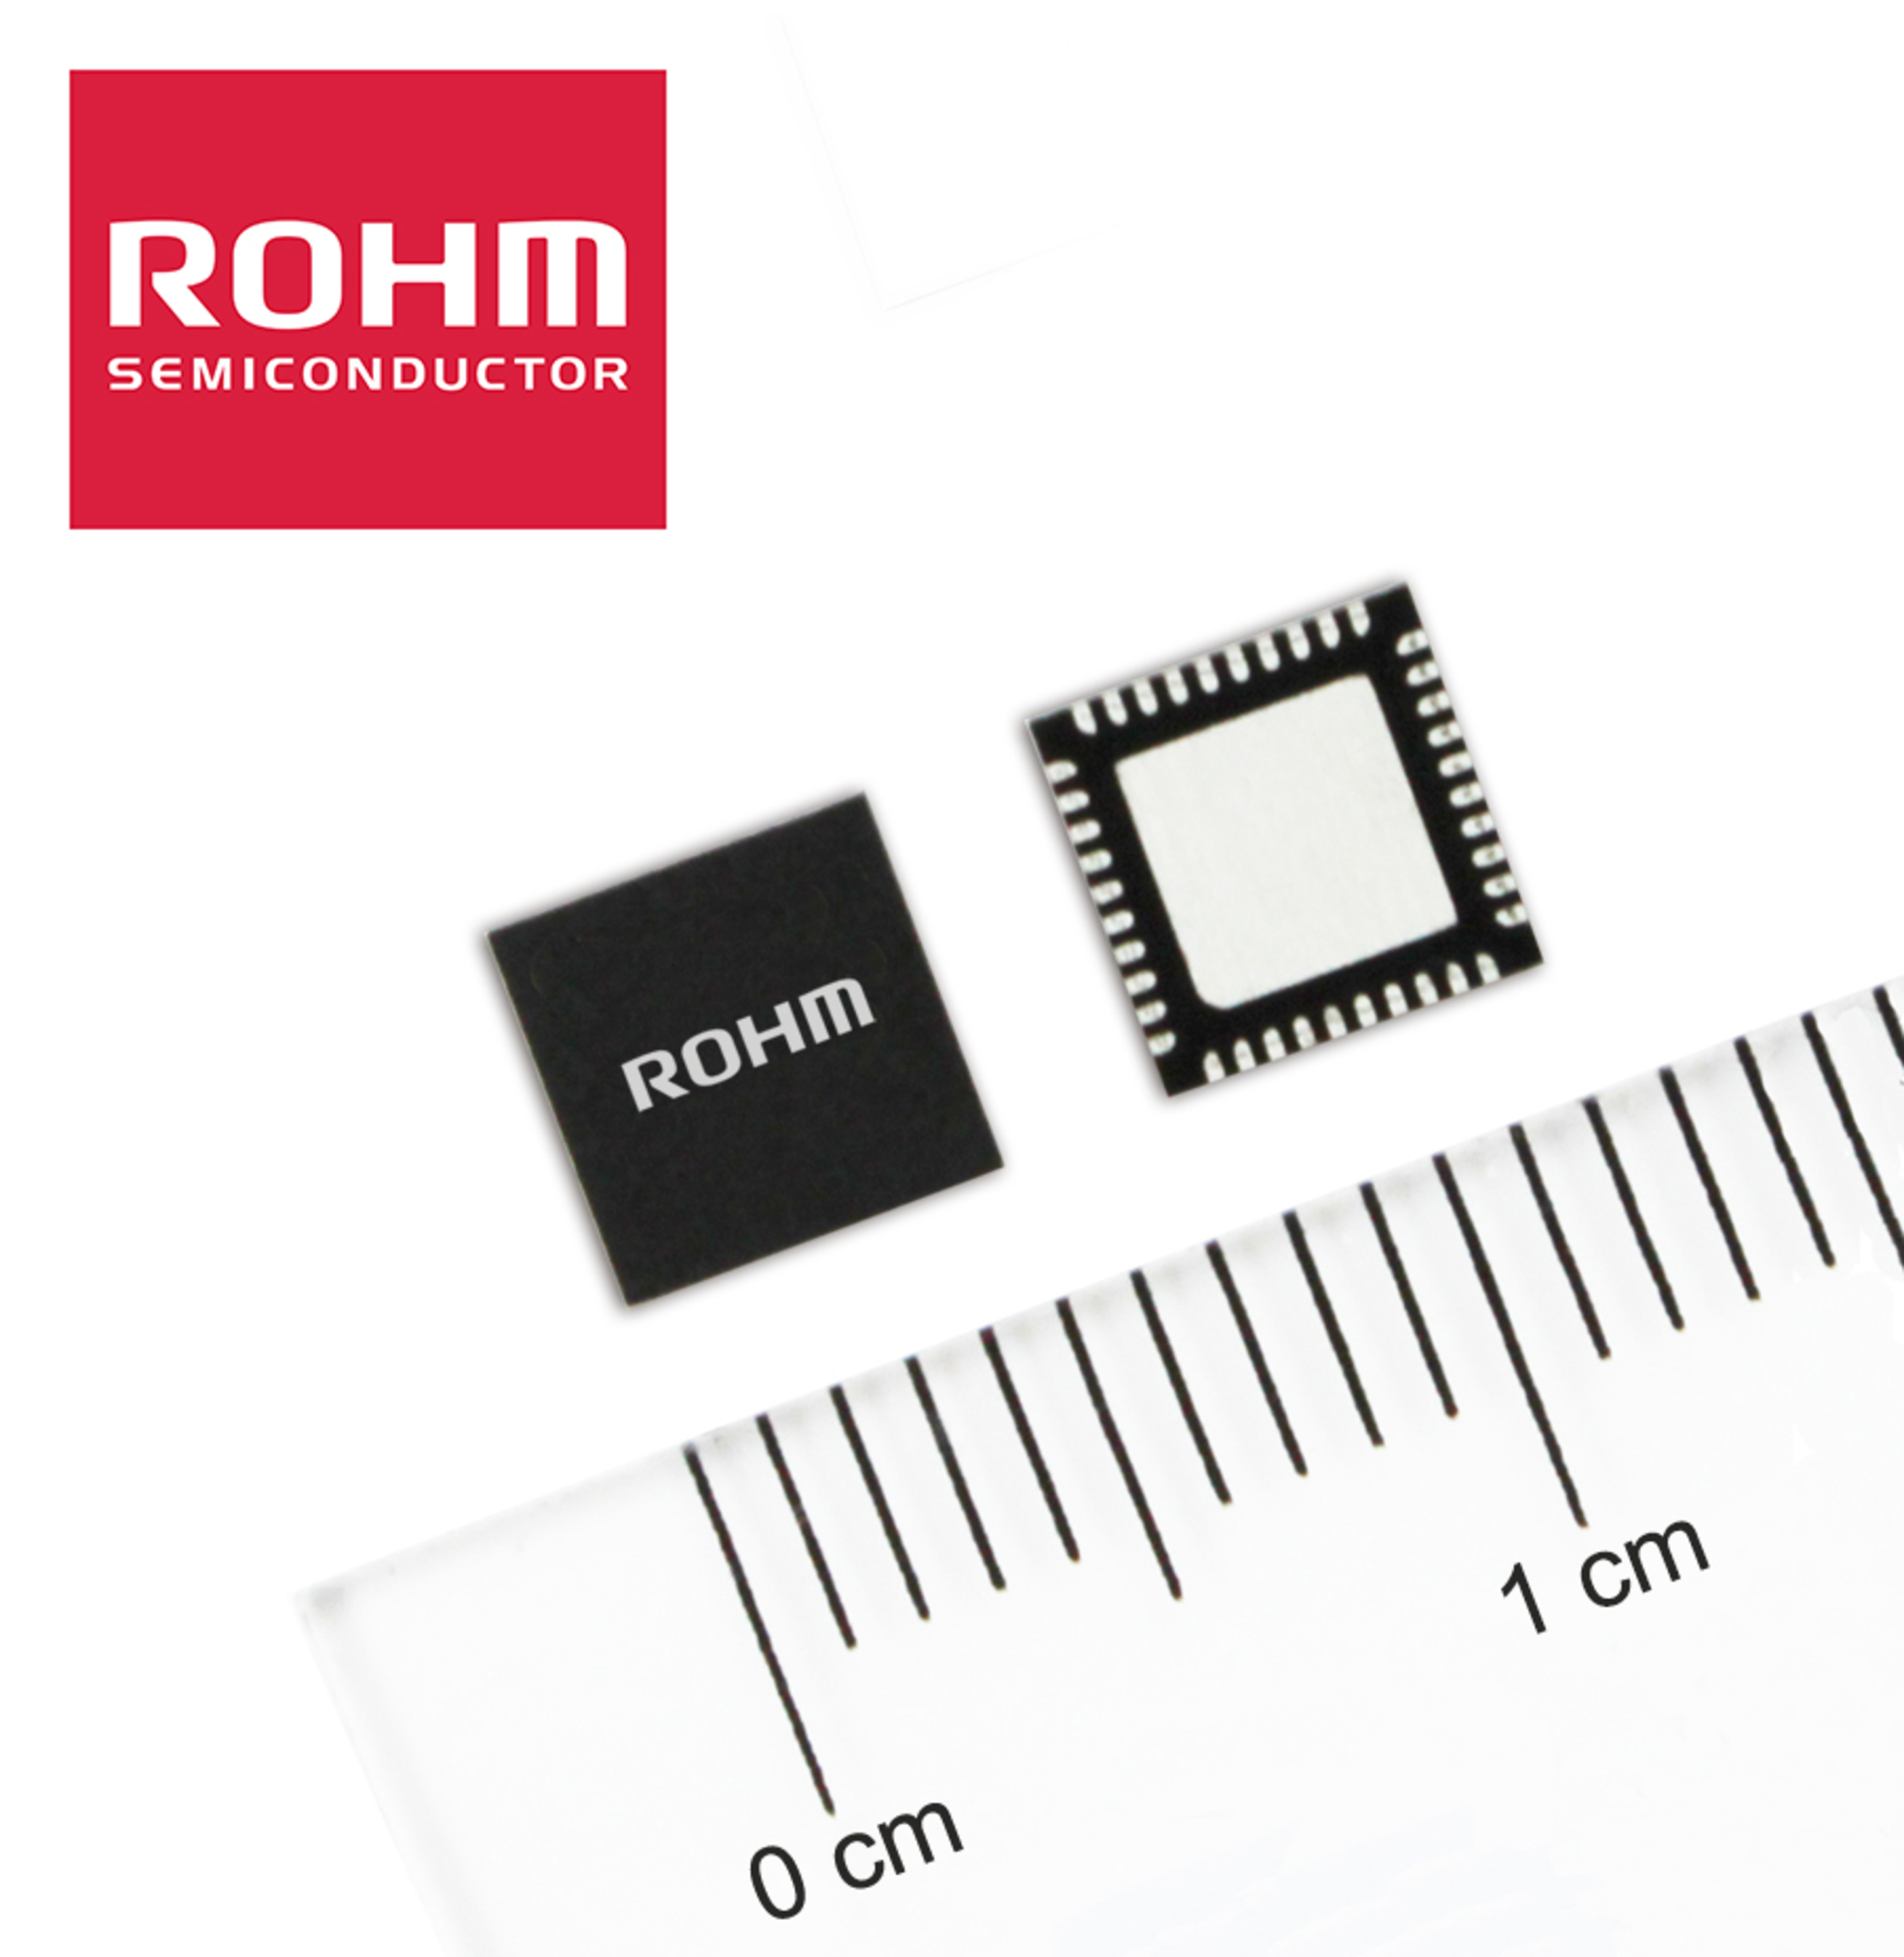 ROHM's BD57020MWV wireless power transmitter IC has received certification from WPC (Wireless Power Consortium). WPC's Qi standard for medium power has attracted attention as a next-generation standard for inductive power transmission that will enable wireless charging of tablet PCs while allowing smartphones and other mobile devices to be charged up to 3x faster than the existing low power standard (5W). In addition, a Foreign Object Detection (FOD) function is included to provide greater safety by detecting foreign metallic objects before power transfer to protect against possible damage due to overheating.